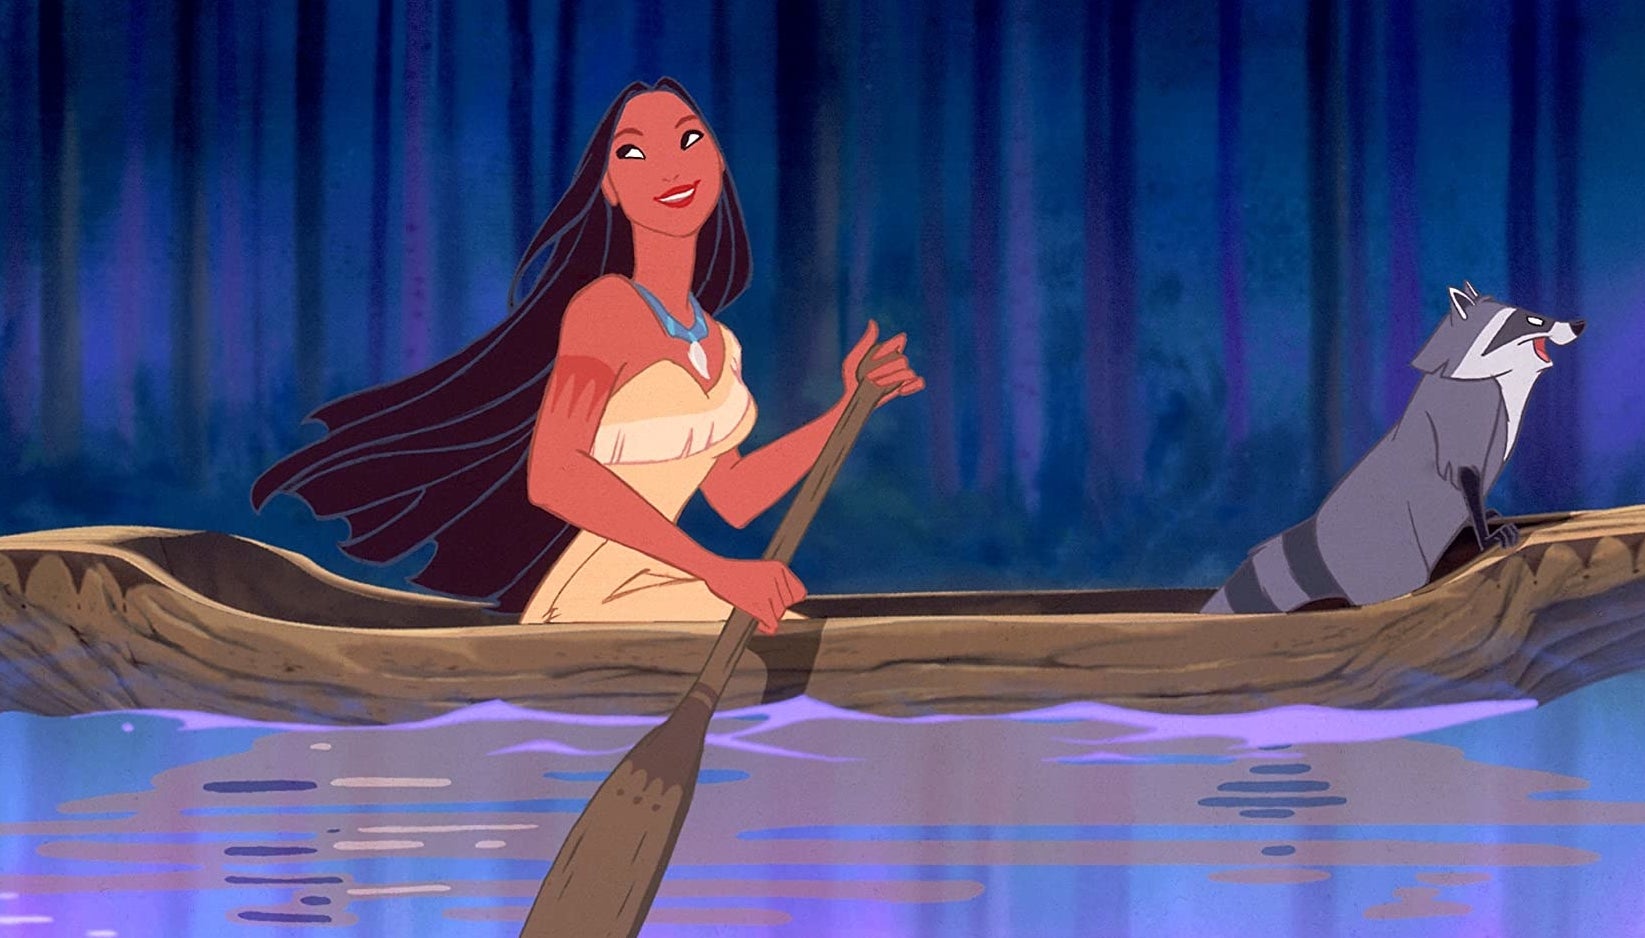 Pocahontas in her dress, rowing a canoe